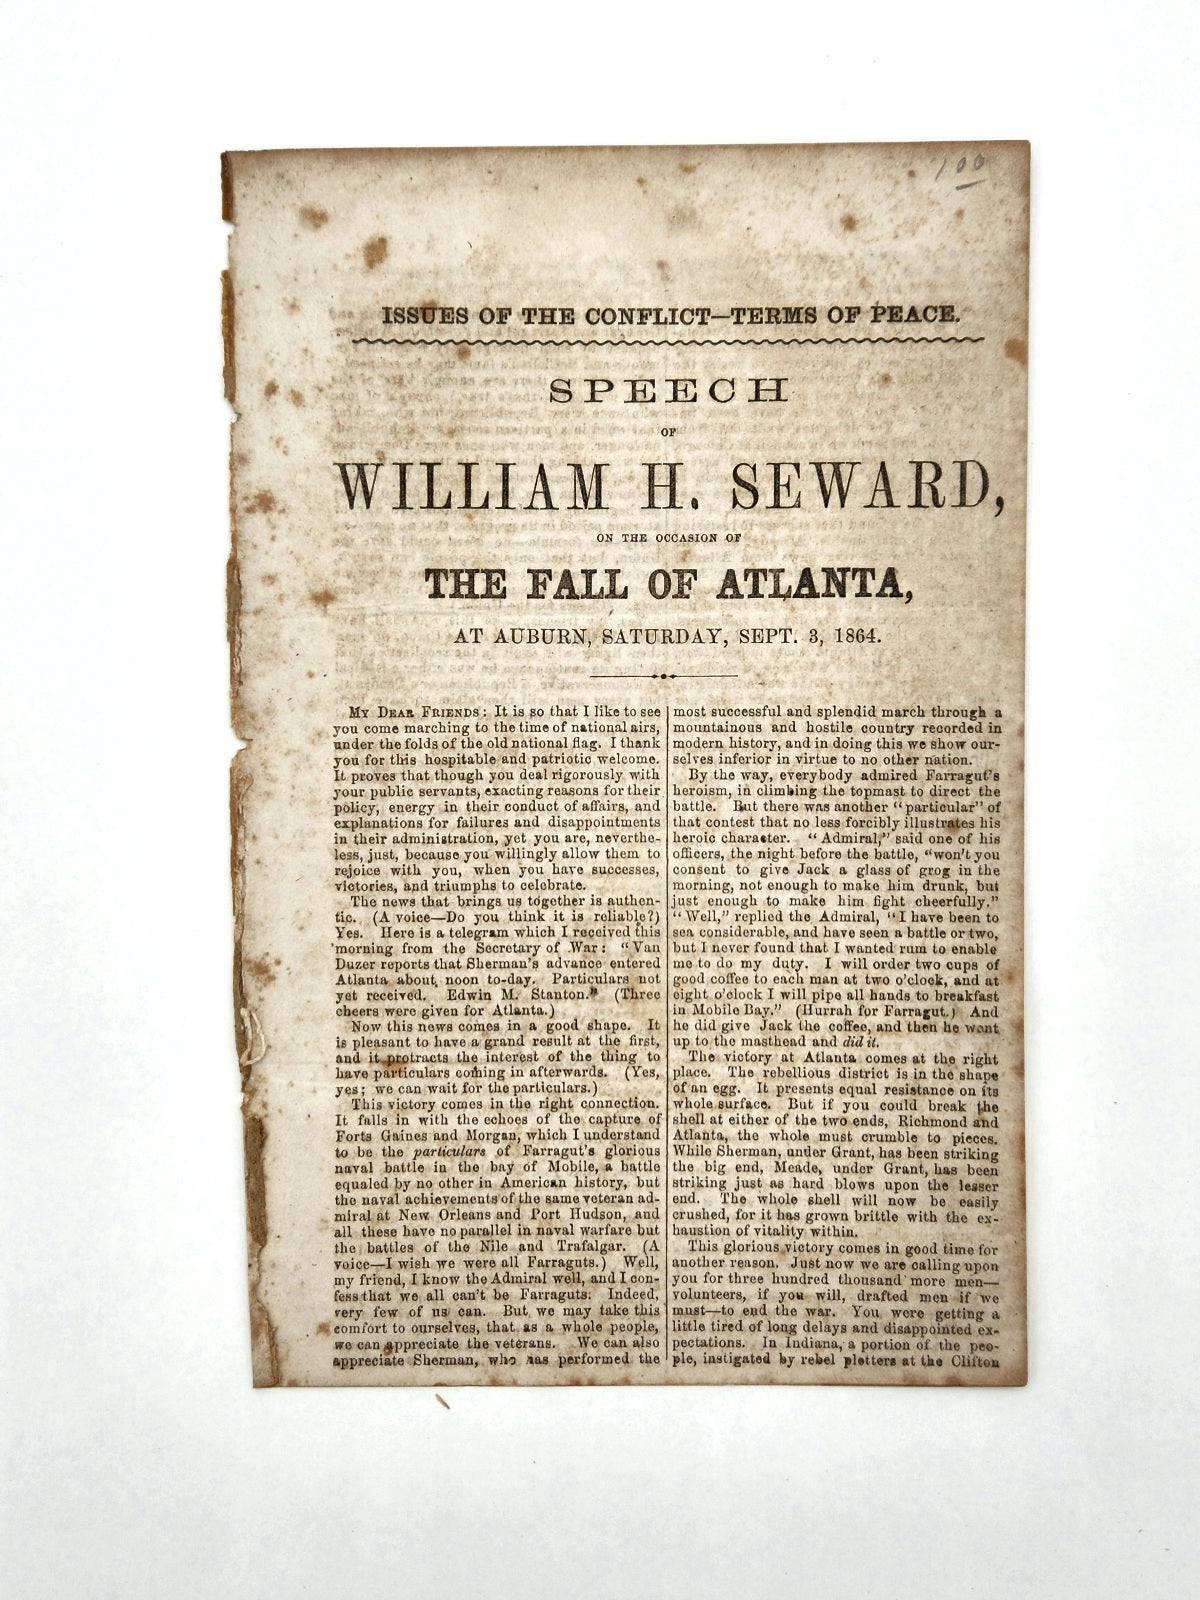 The Fall of Atlanta - Issues of the Conflict - Terms of Peace - Speech of William H. Seward